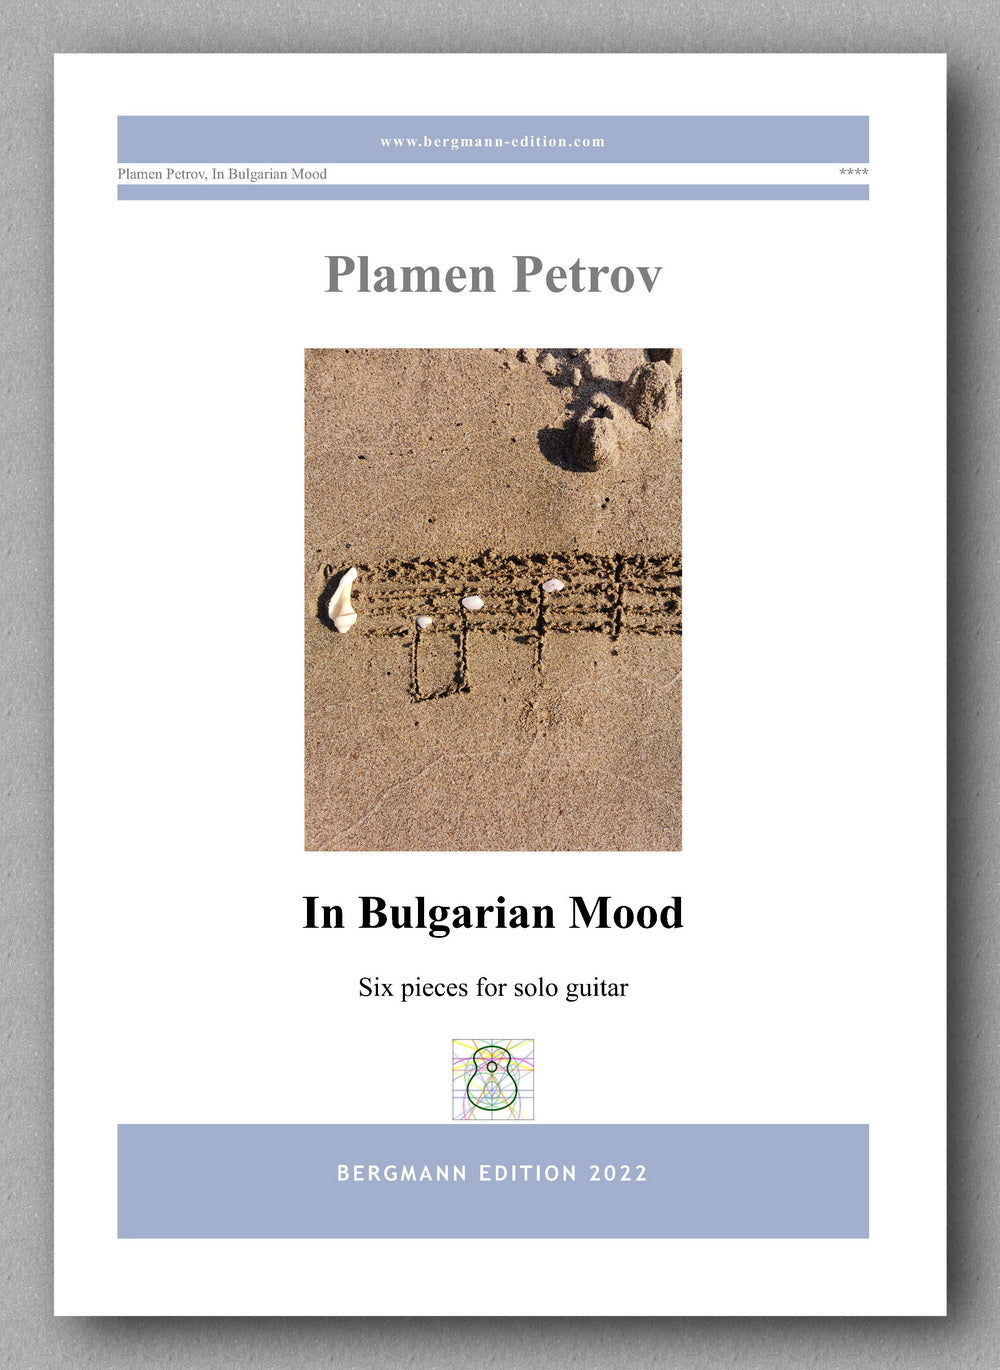 In Bulgarian Mood by Plamen Petrov - preview of the cover